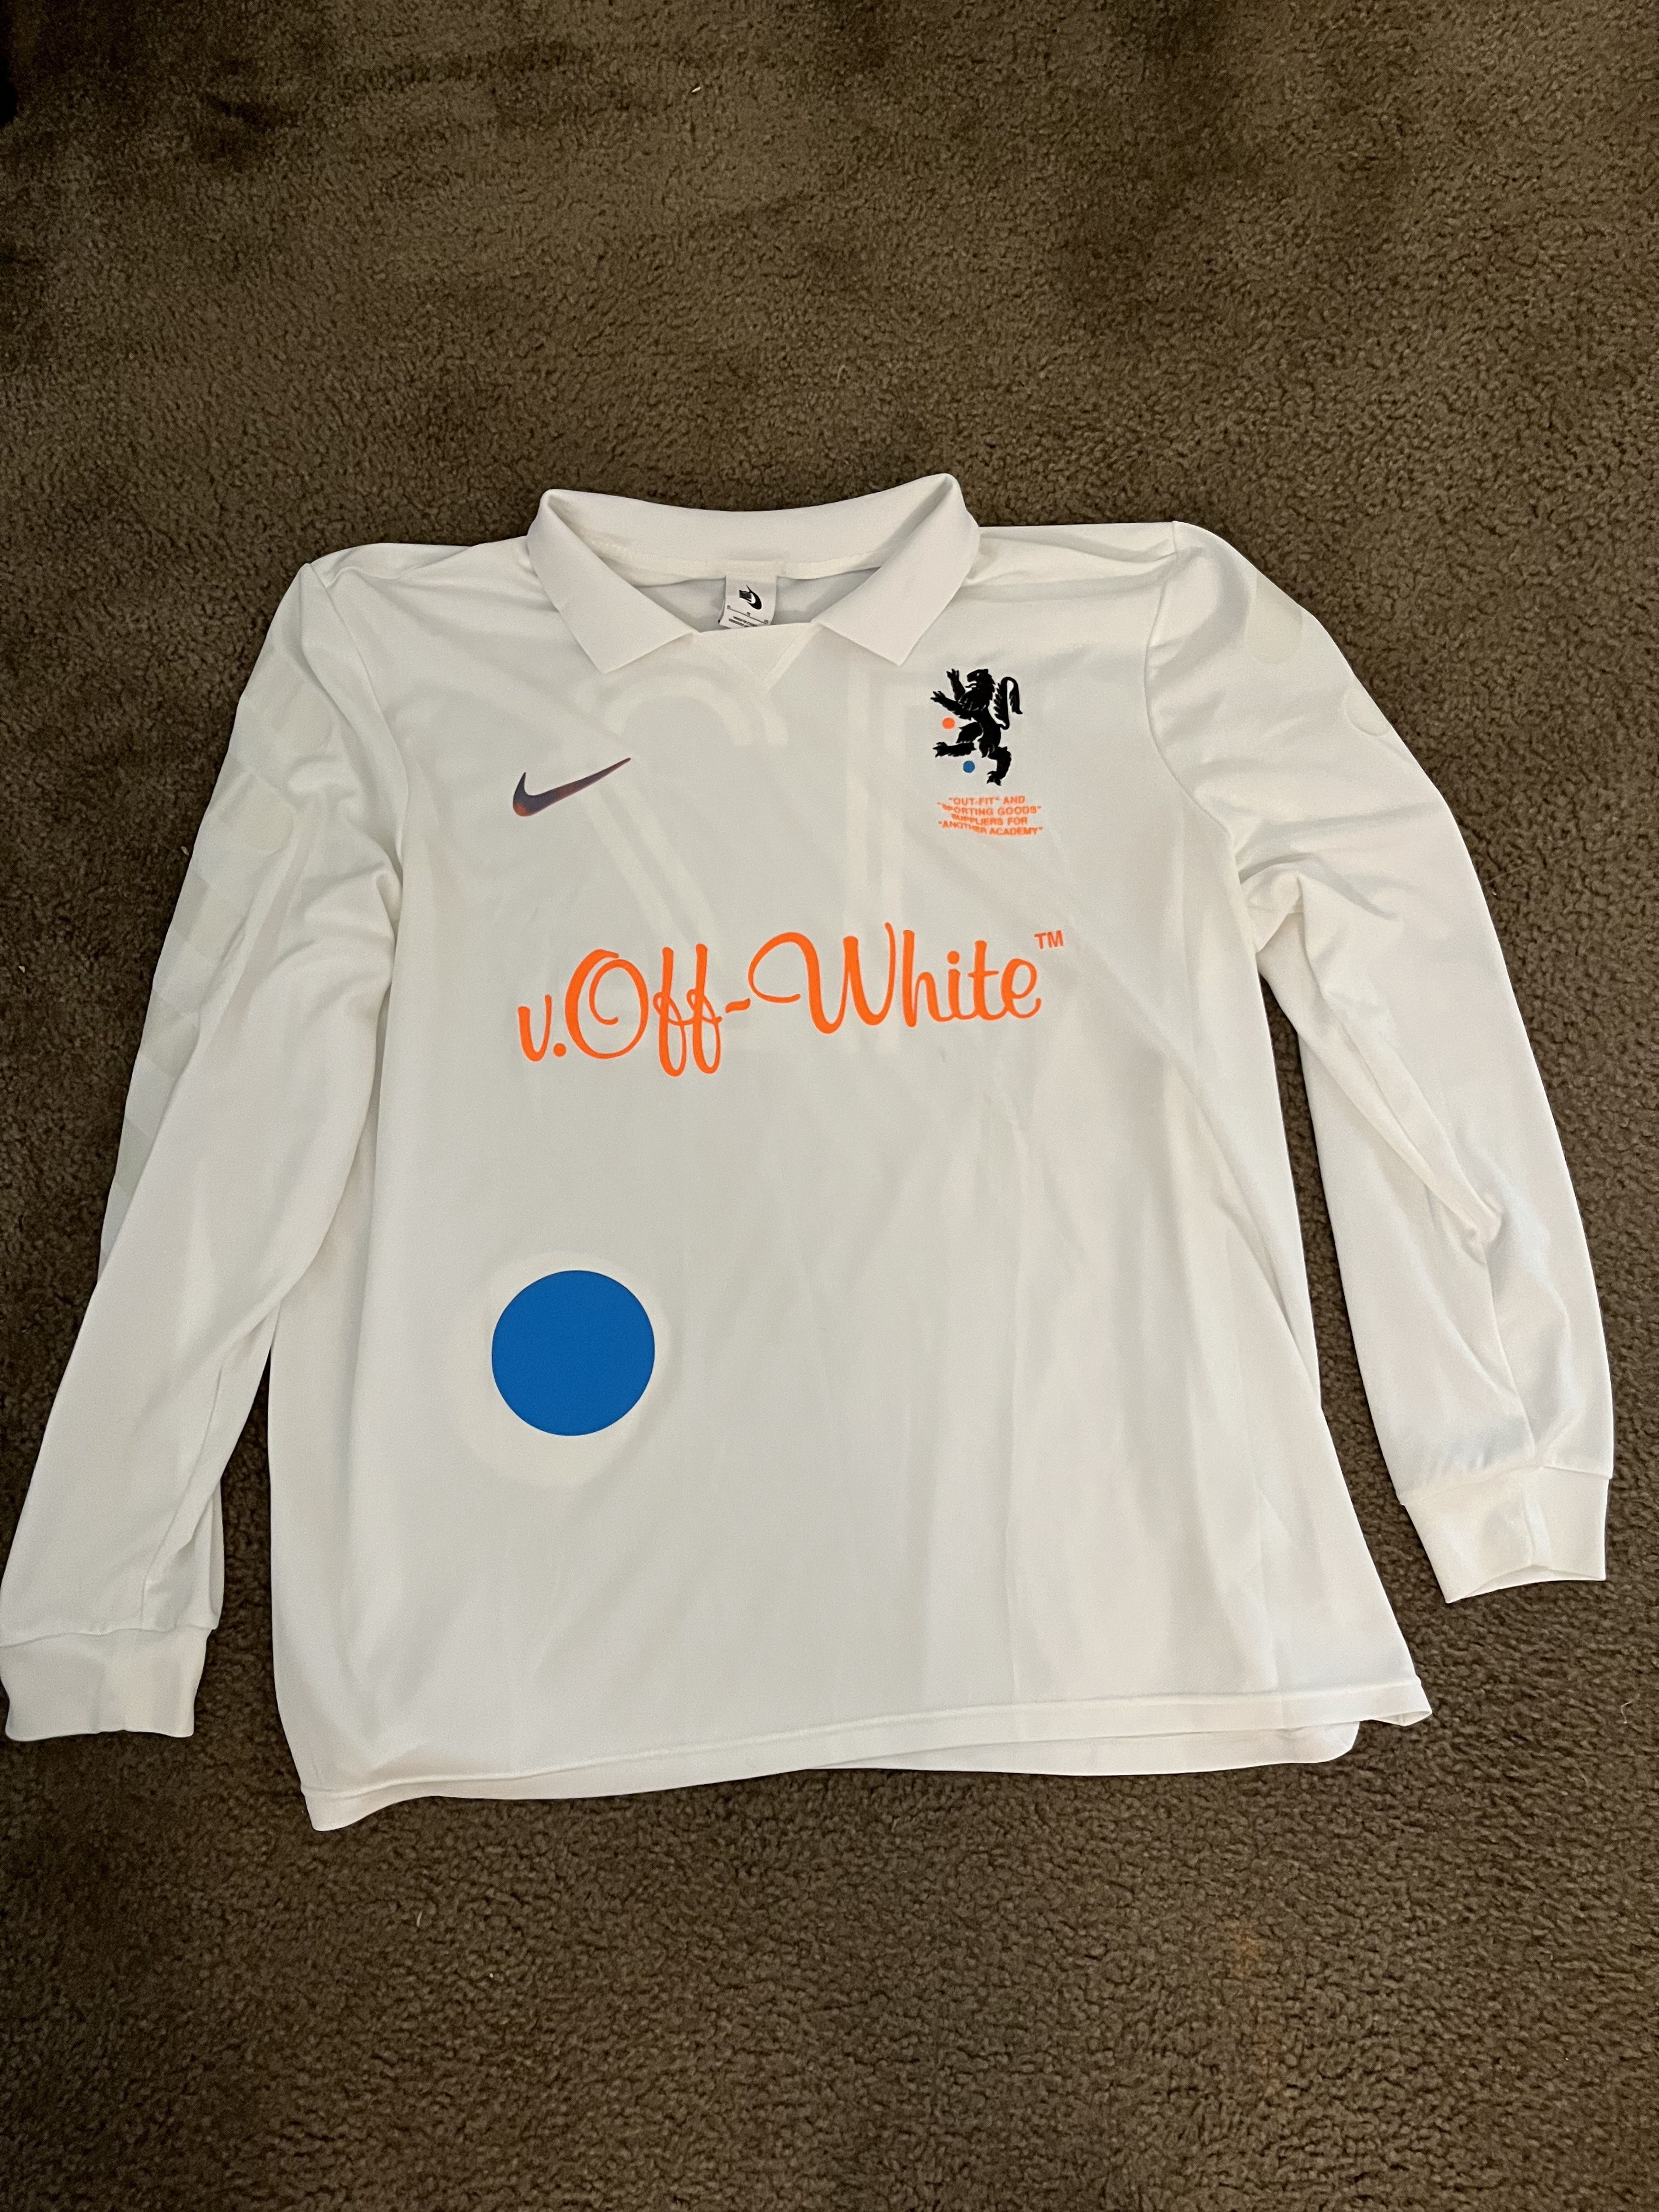 Nike Off White Mercurial Nrg Fb Jersey | Grailed